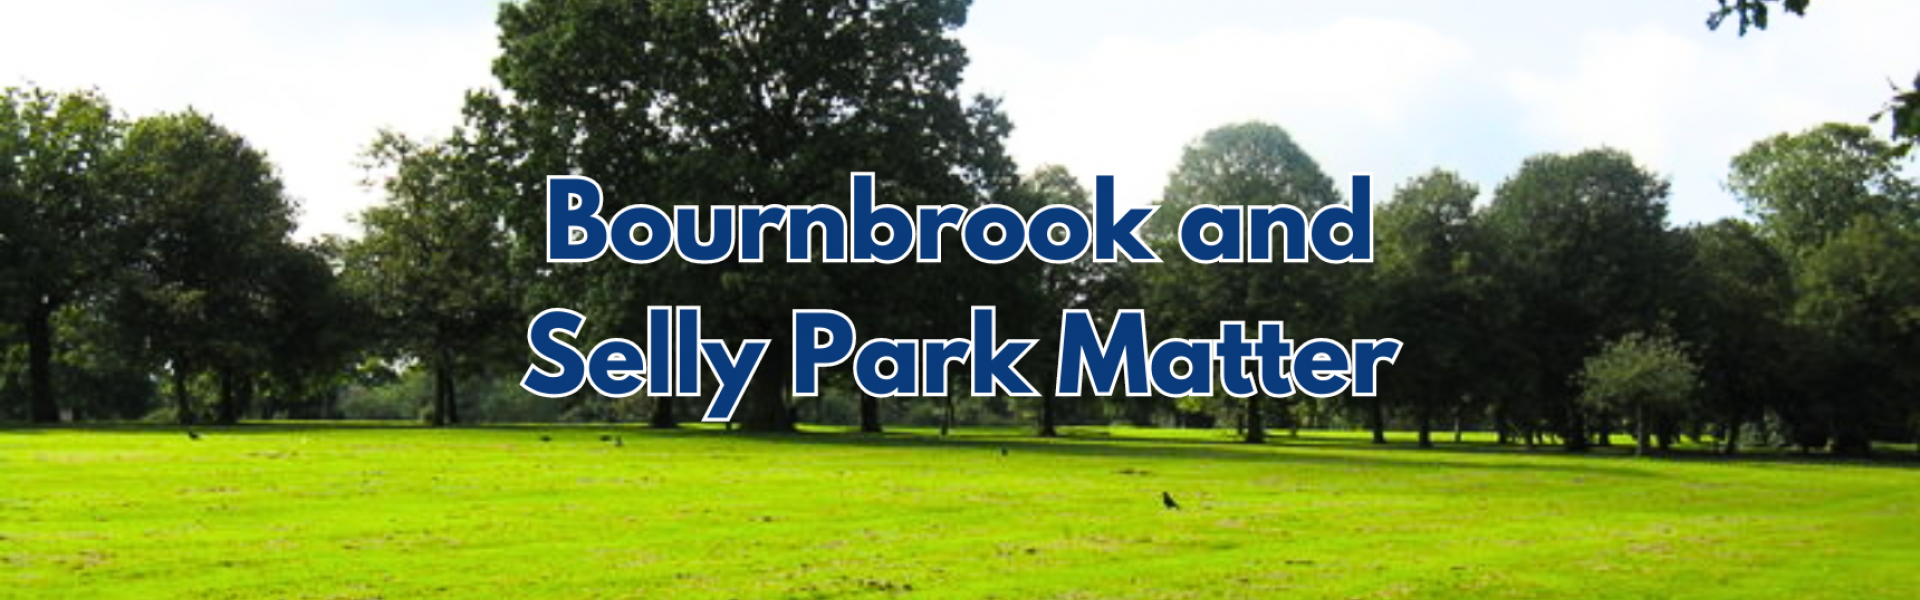 Birmingham Local Conservatives Announce Candidate for Bournbrook & Selly Park By-Election